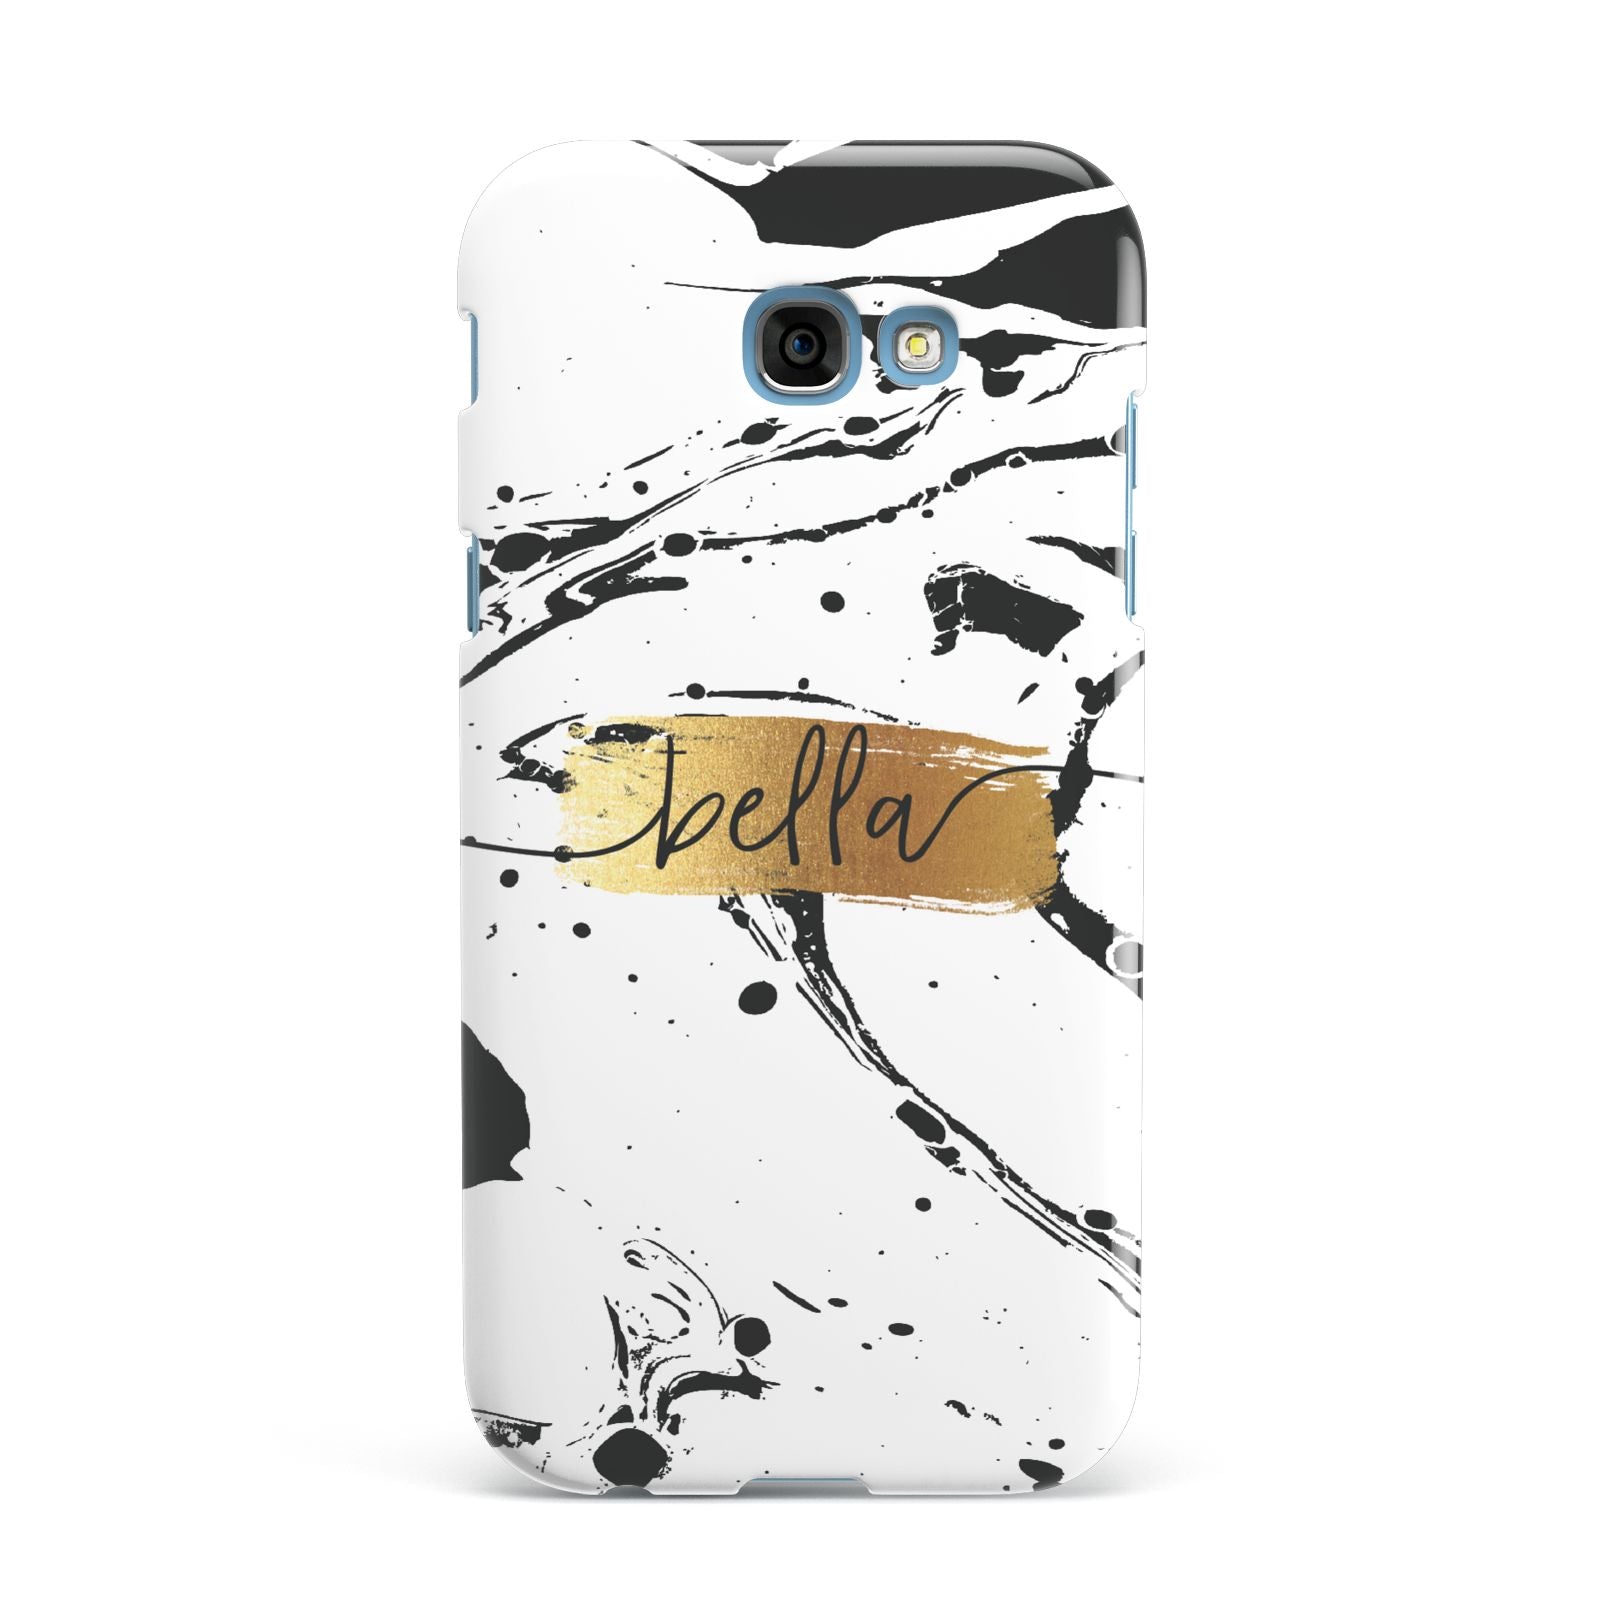 Personalised White Gold Swirl Marble Samsung Galaxy A7 2017 Case